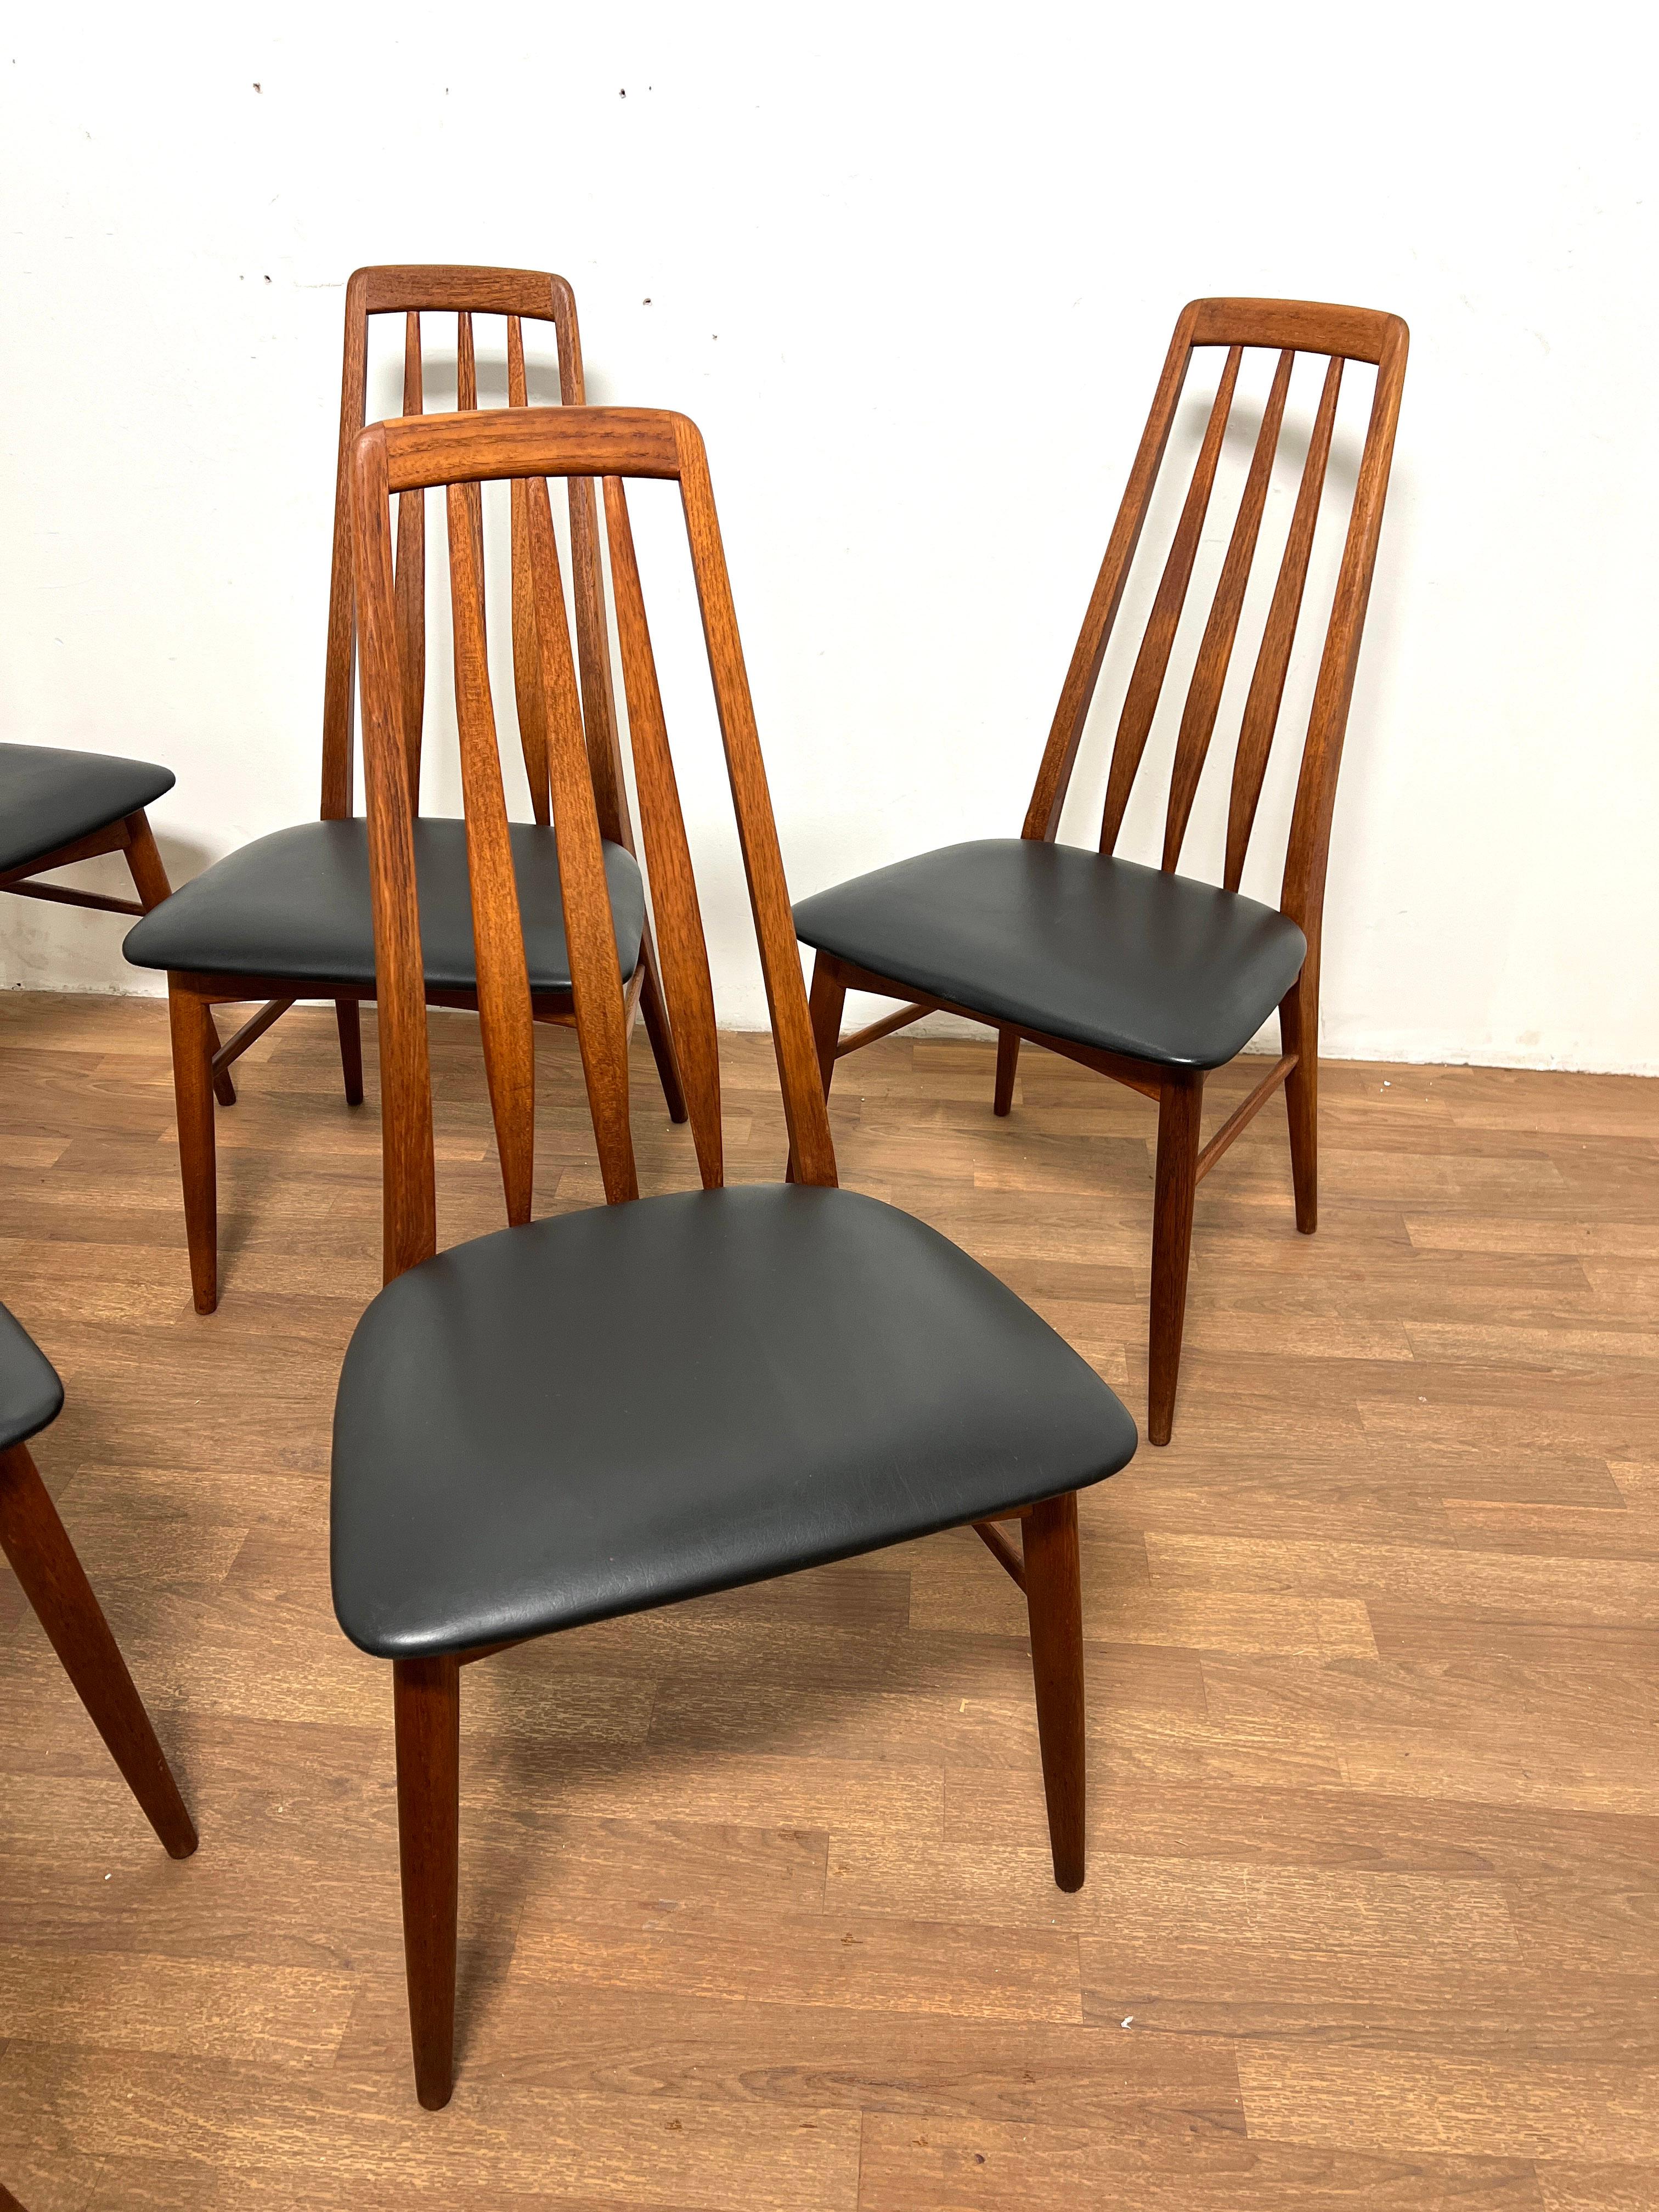 Set of six high backed teak dining chairs, the model known as 